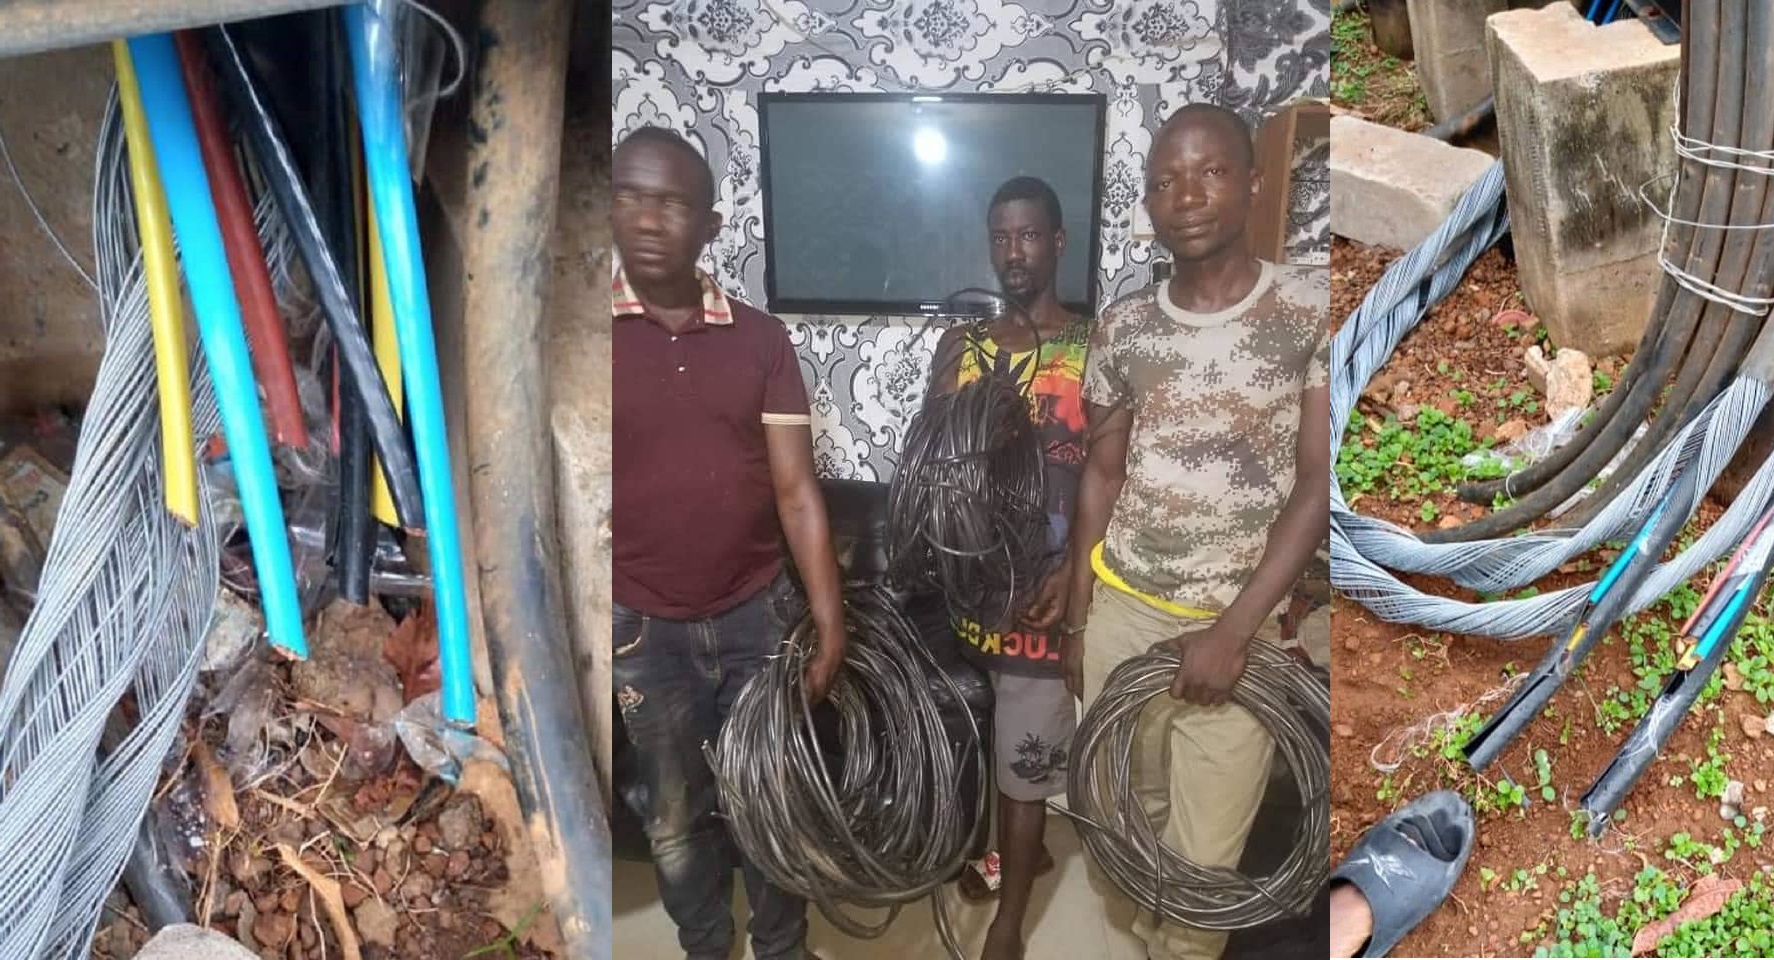 Notorious Thieves Who Specialize in Stealing EDSA Cables Finally Arrested in Freetown